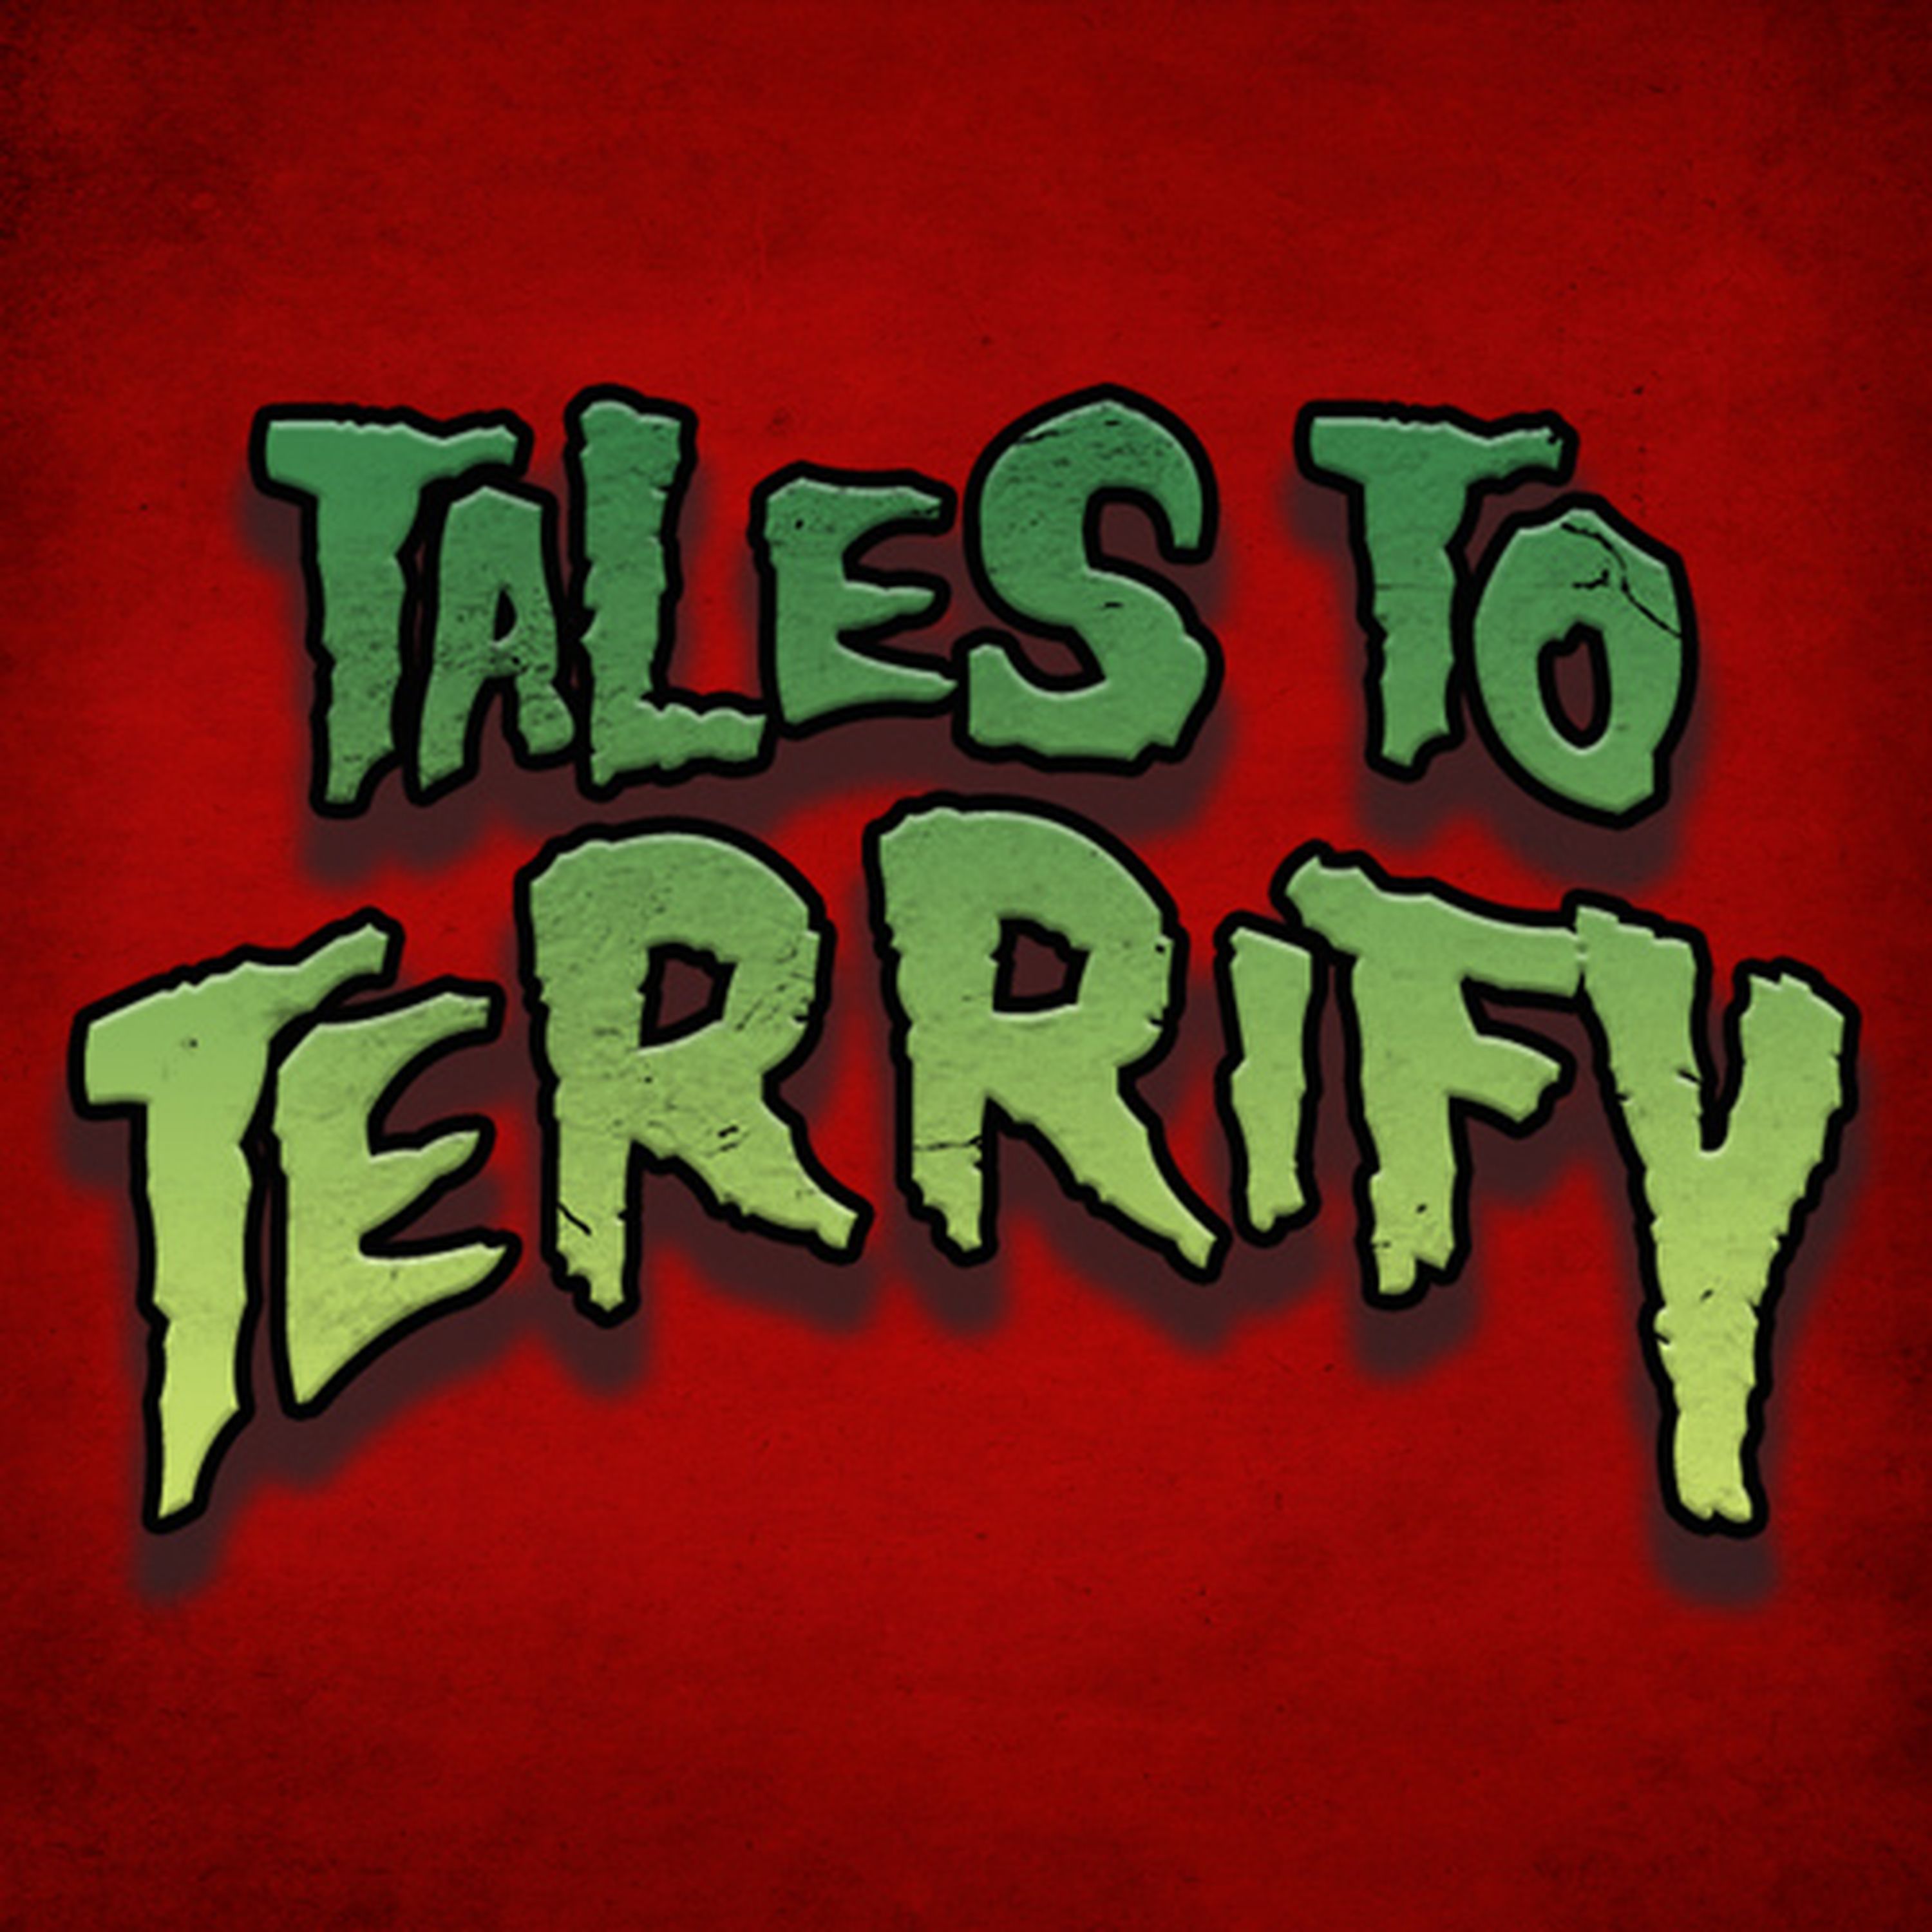 Tales to Terrify 255 R. L. King Terence Kuch